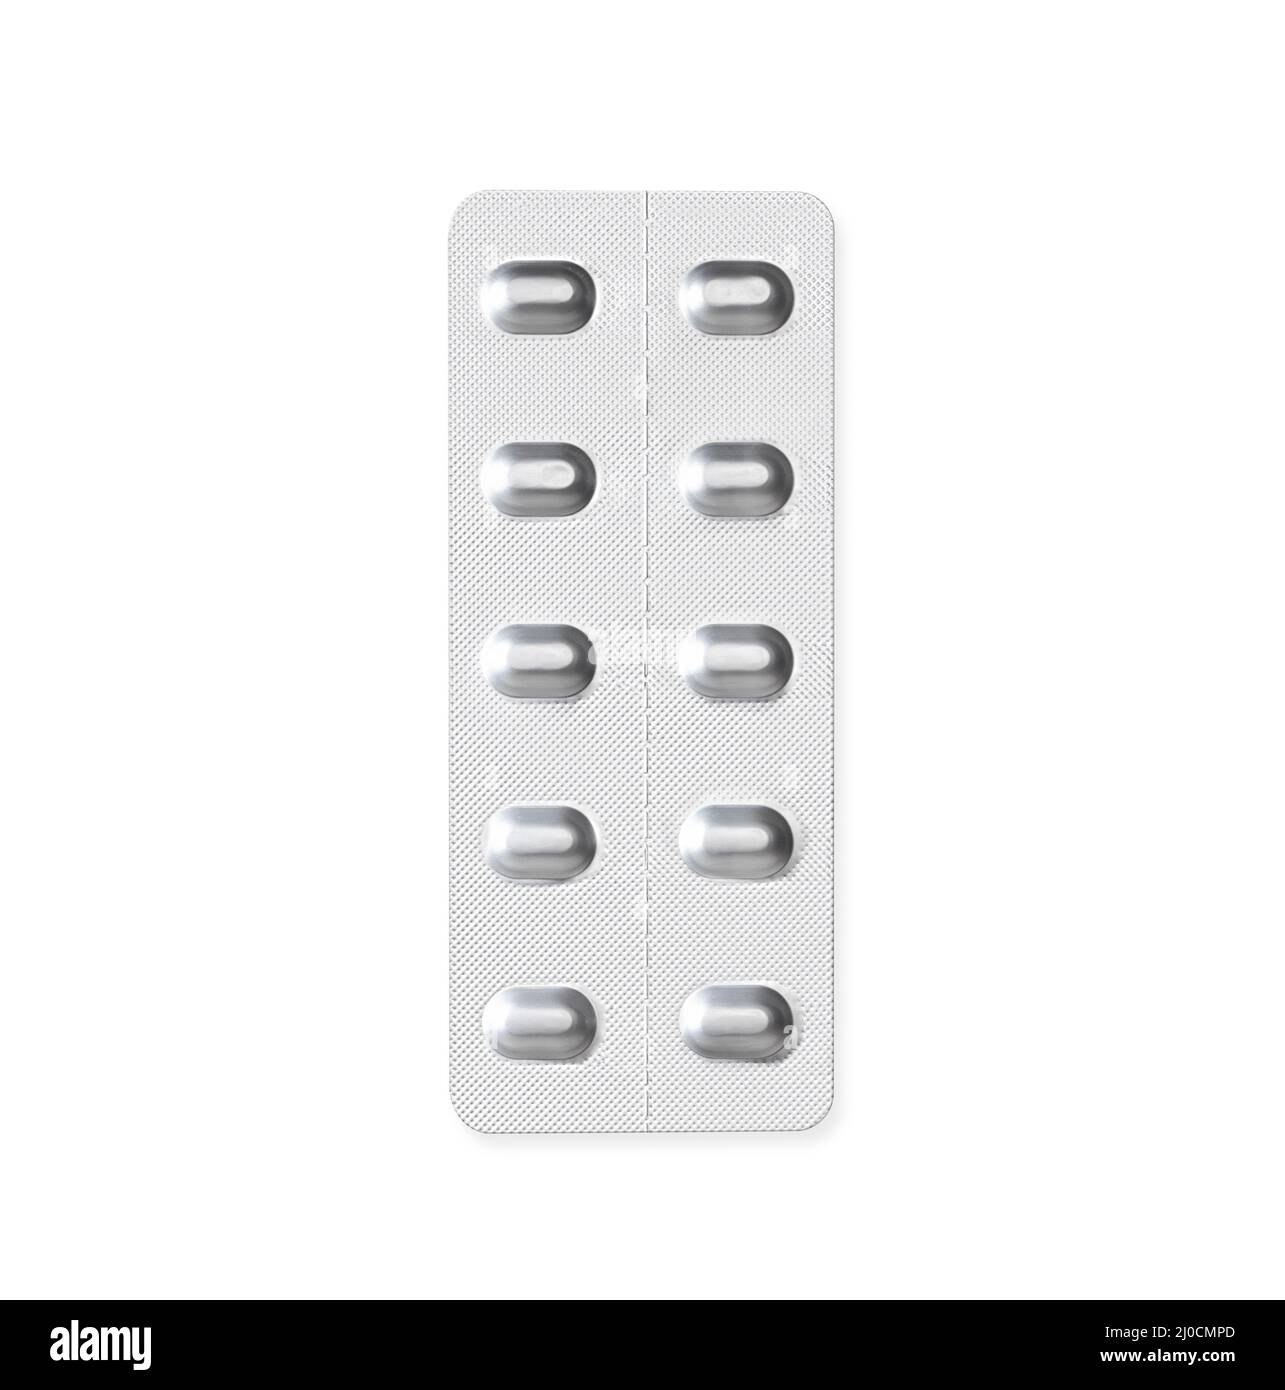 Isolated tablet pills in blister package or pill pack. Silver aluminium 10-pack pill dispenser used for drugs, medication and vitamins. Stock Photo